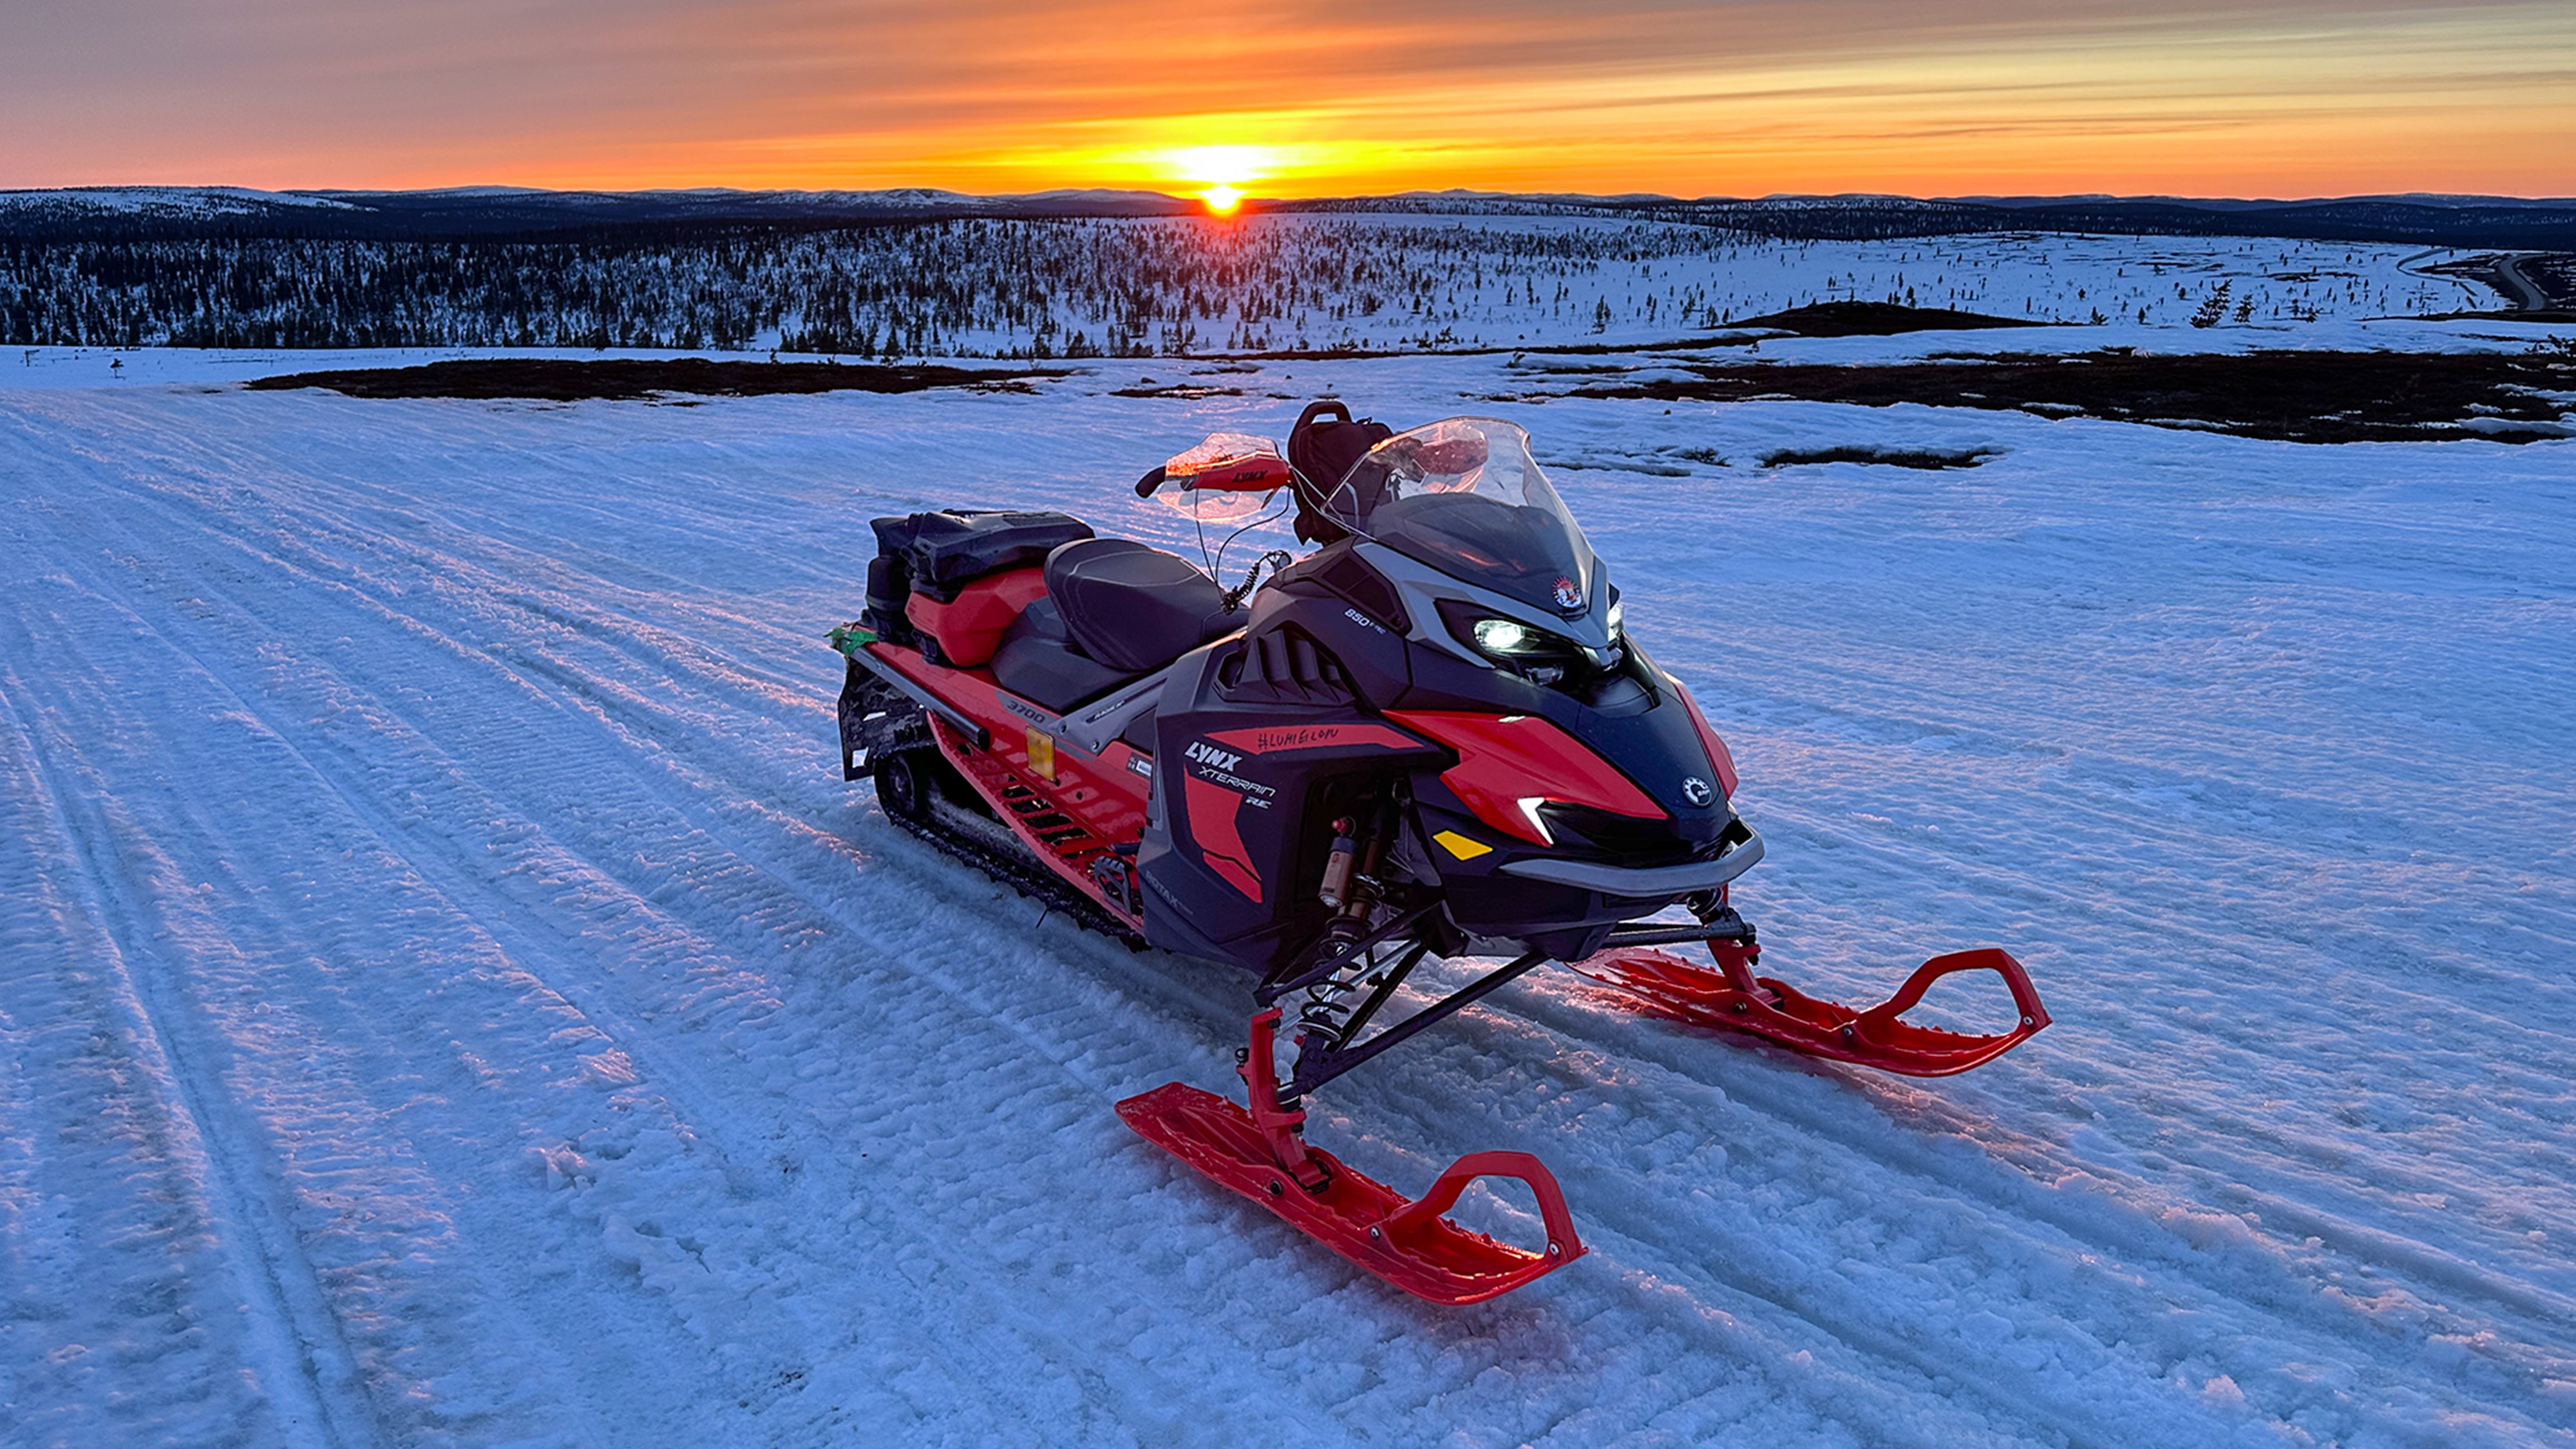 Lynx Xterrain RE 850 E-TEC crossover snowmobile parked on a trail